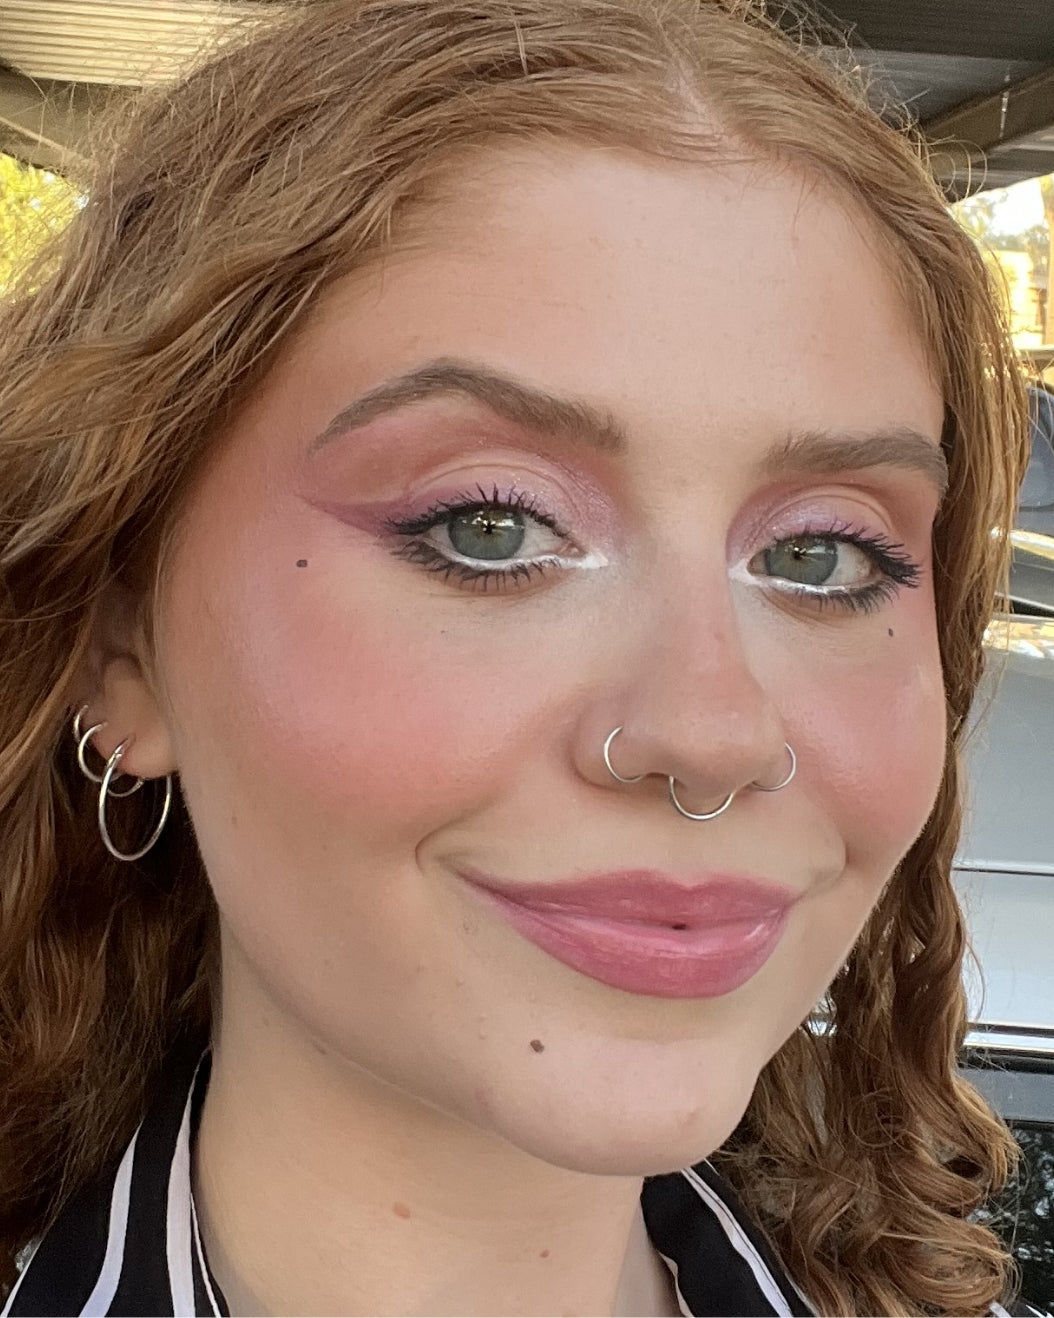 Makeup artist wears a back-to-school makeup look featuring cat-eye liner in a mauve shade.